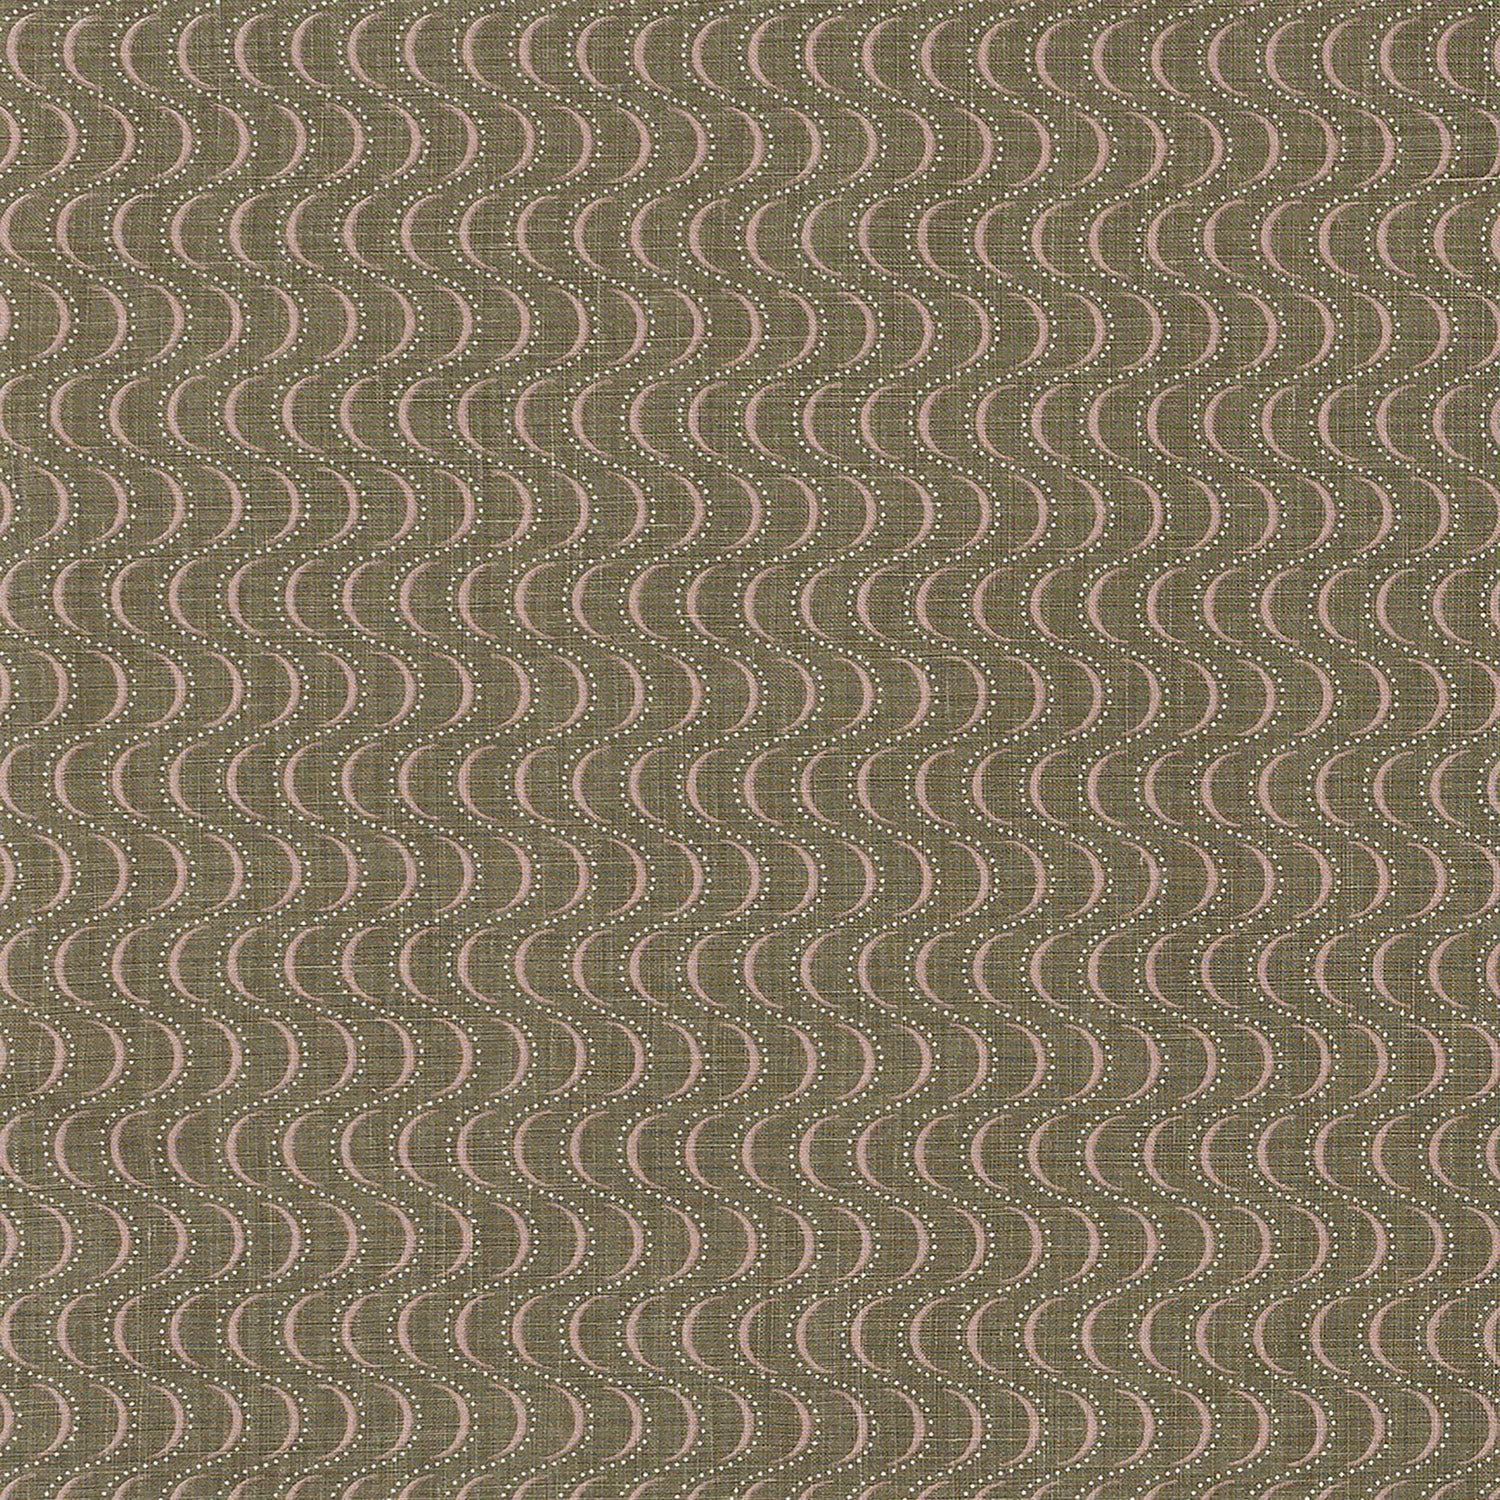 Fabric in an undulating stripe pattern in light pink and white on a brown field.